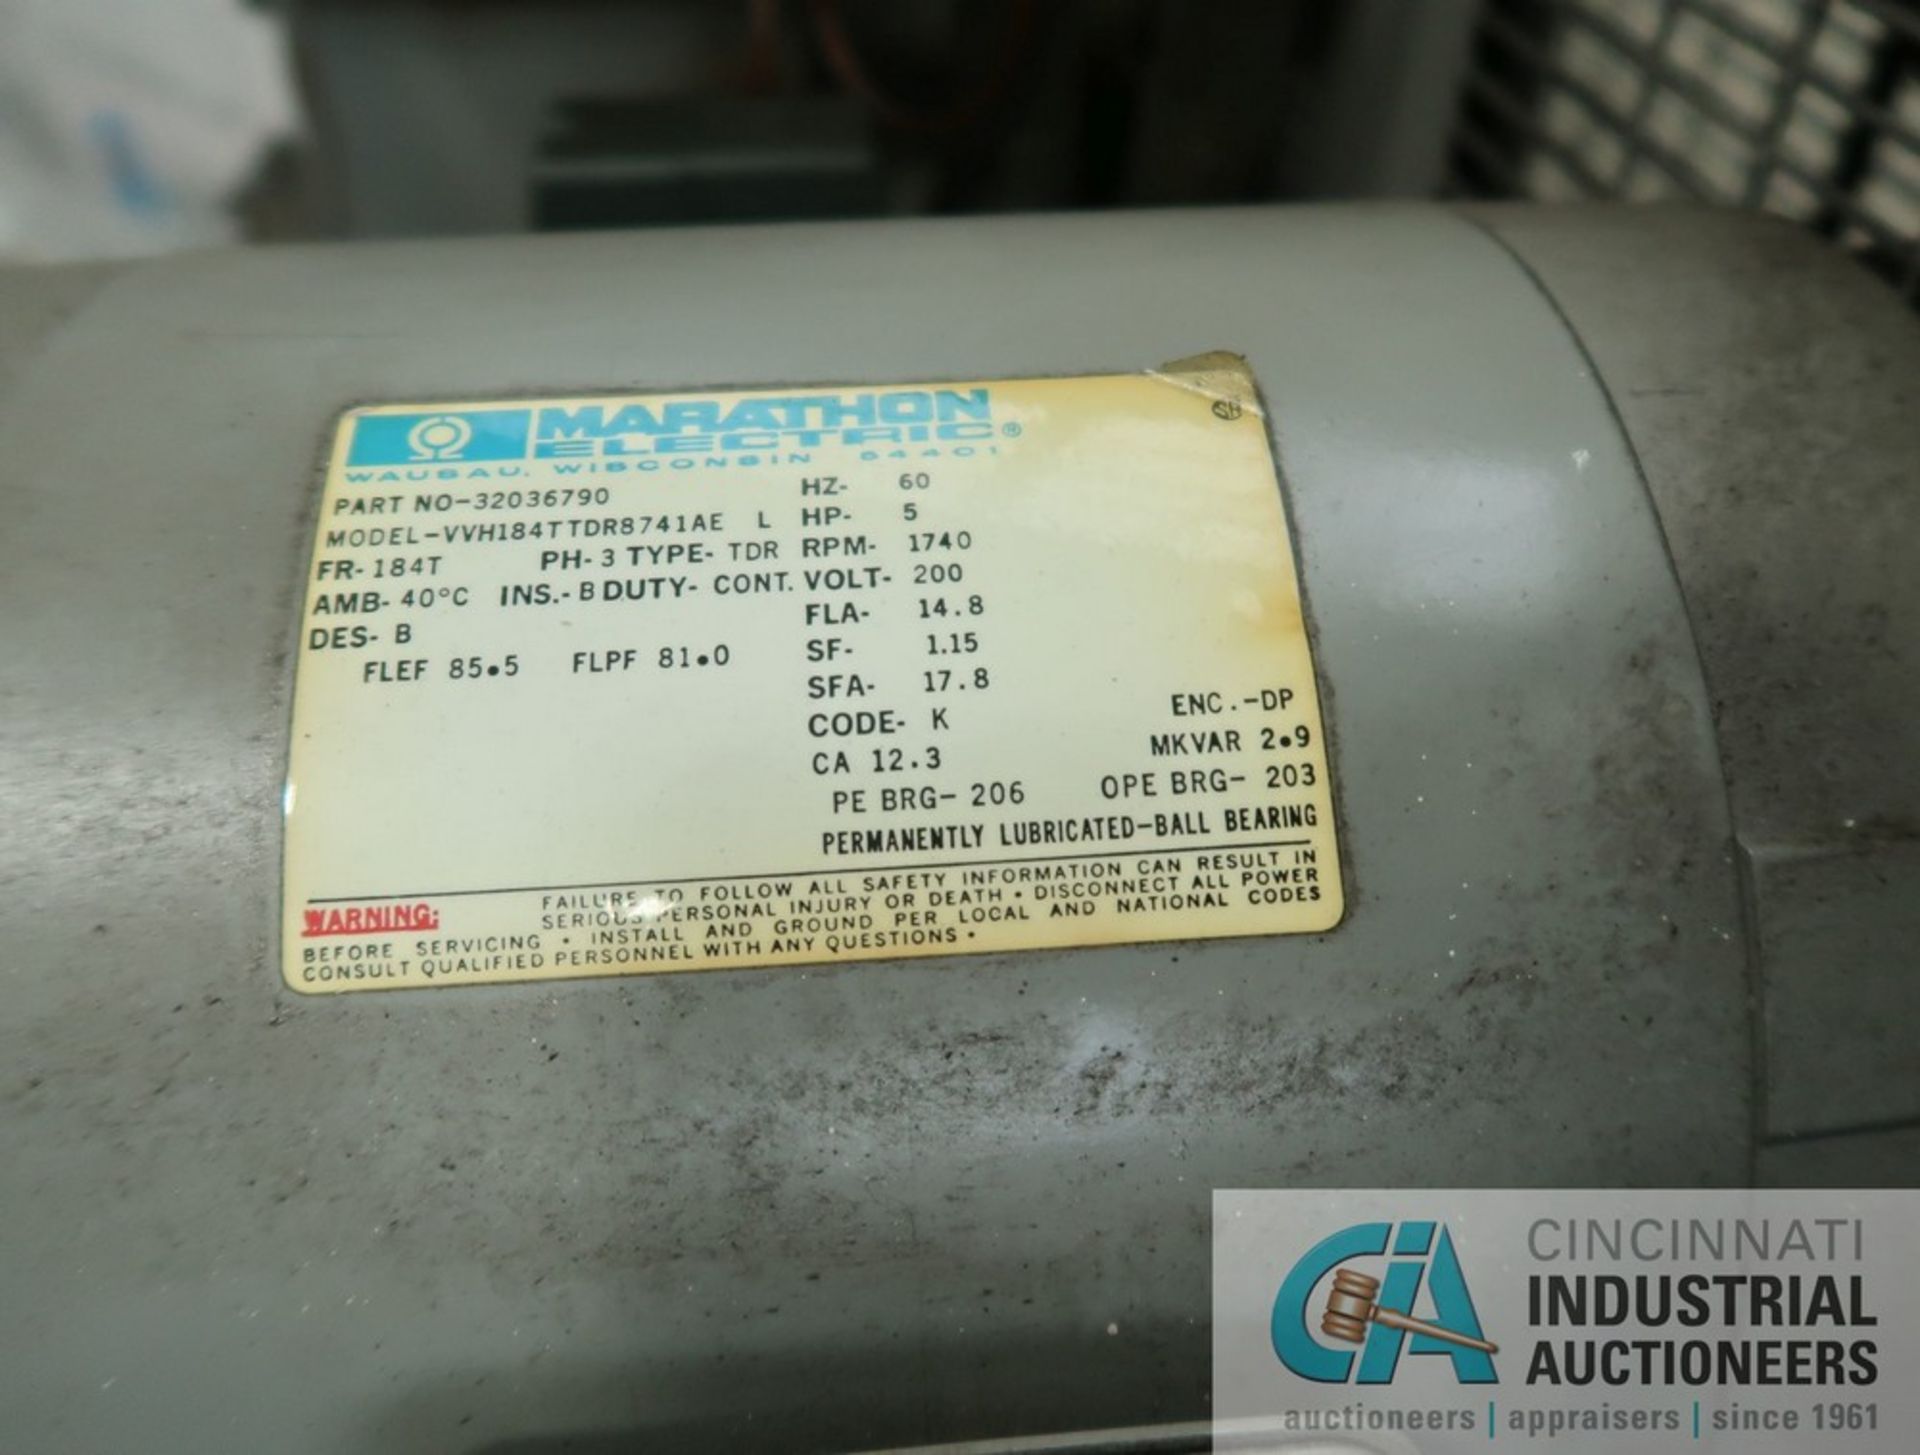 INGERSOLL RAND MODEL T30 VERTICAL TANK AIR COMPRESSOR; S/N 30T661006, 3-PHASE, 200 VOLTS, 5 HP MOTOR - Image 8 of 8